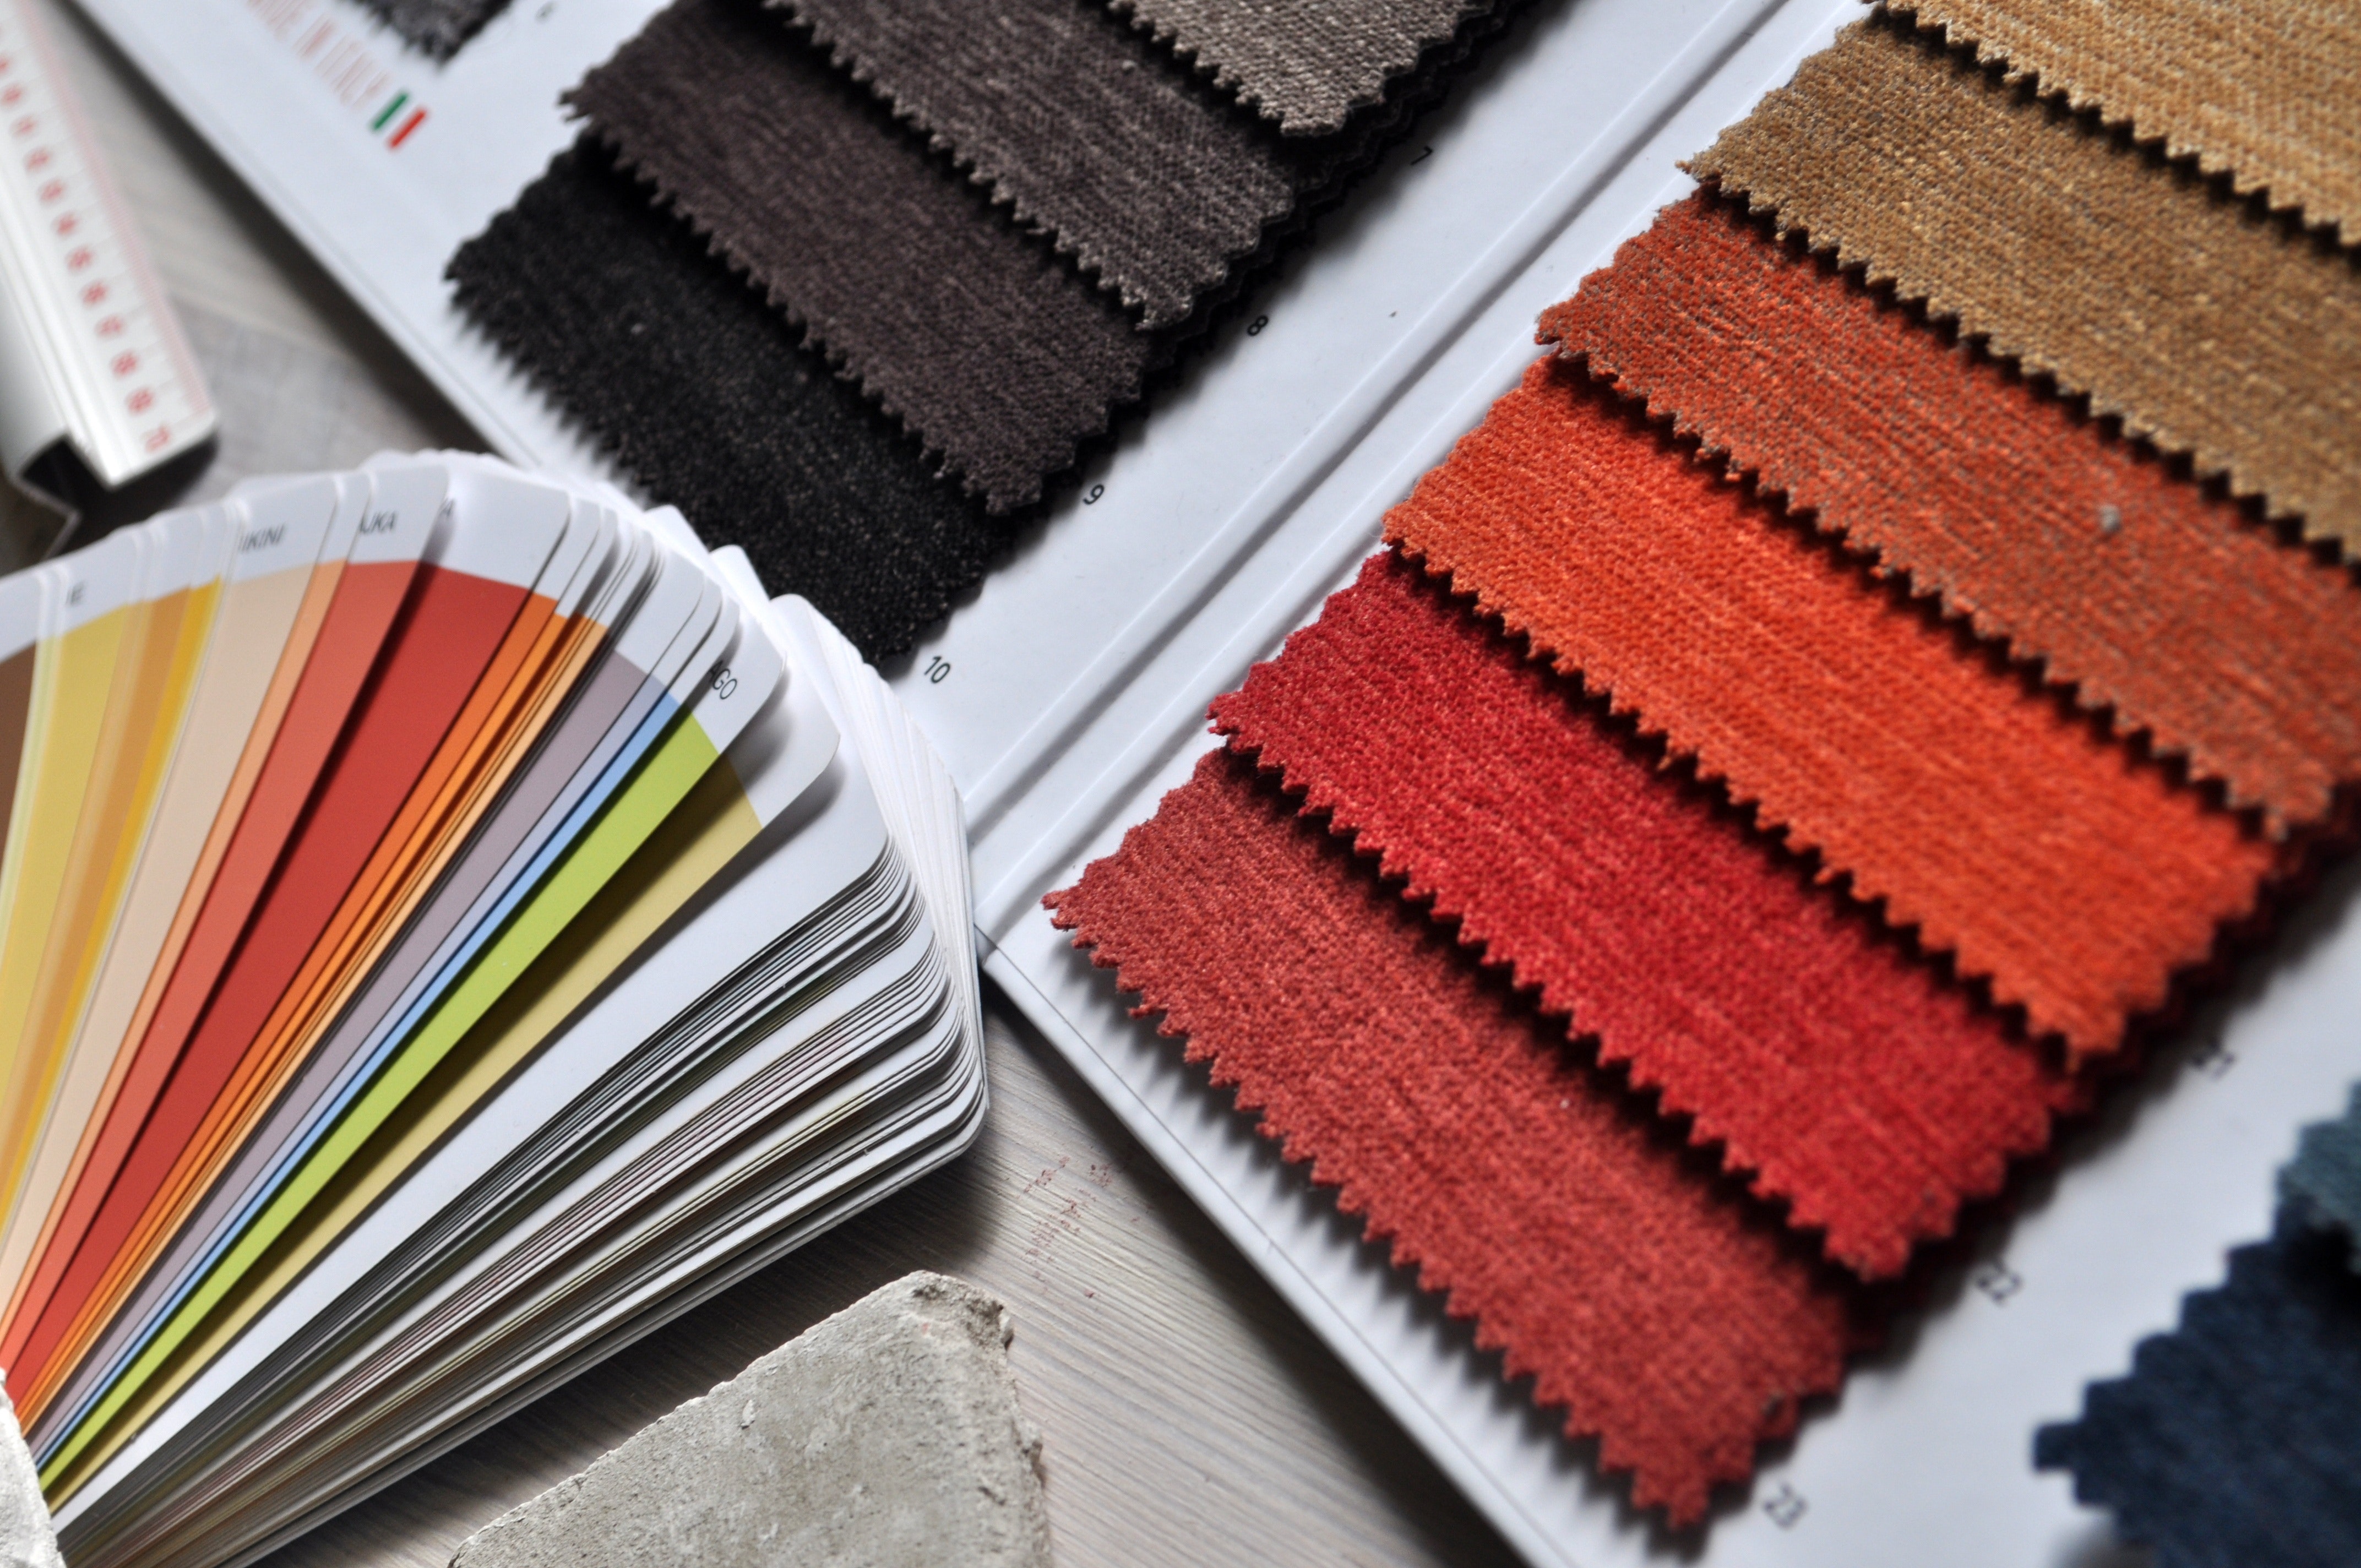 Pick colours and textures that fit your ideal scheme